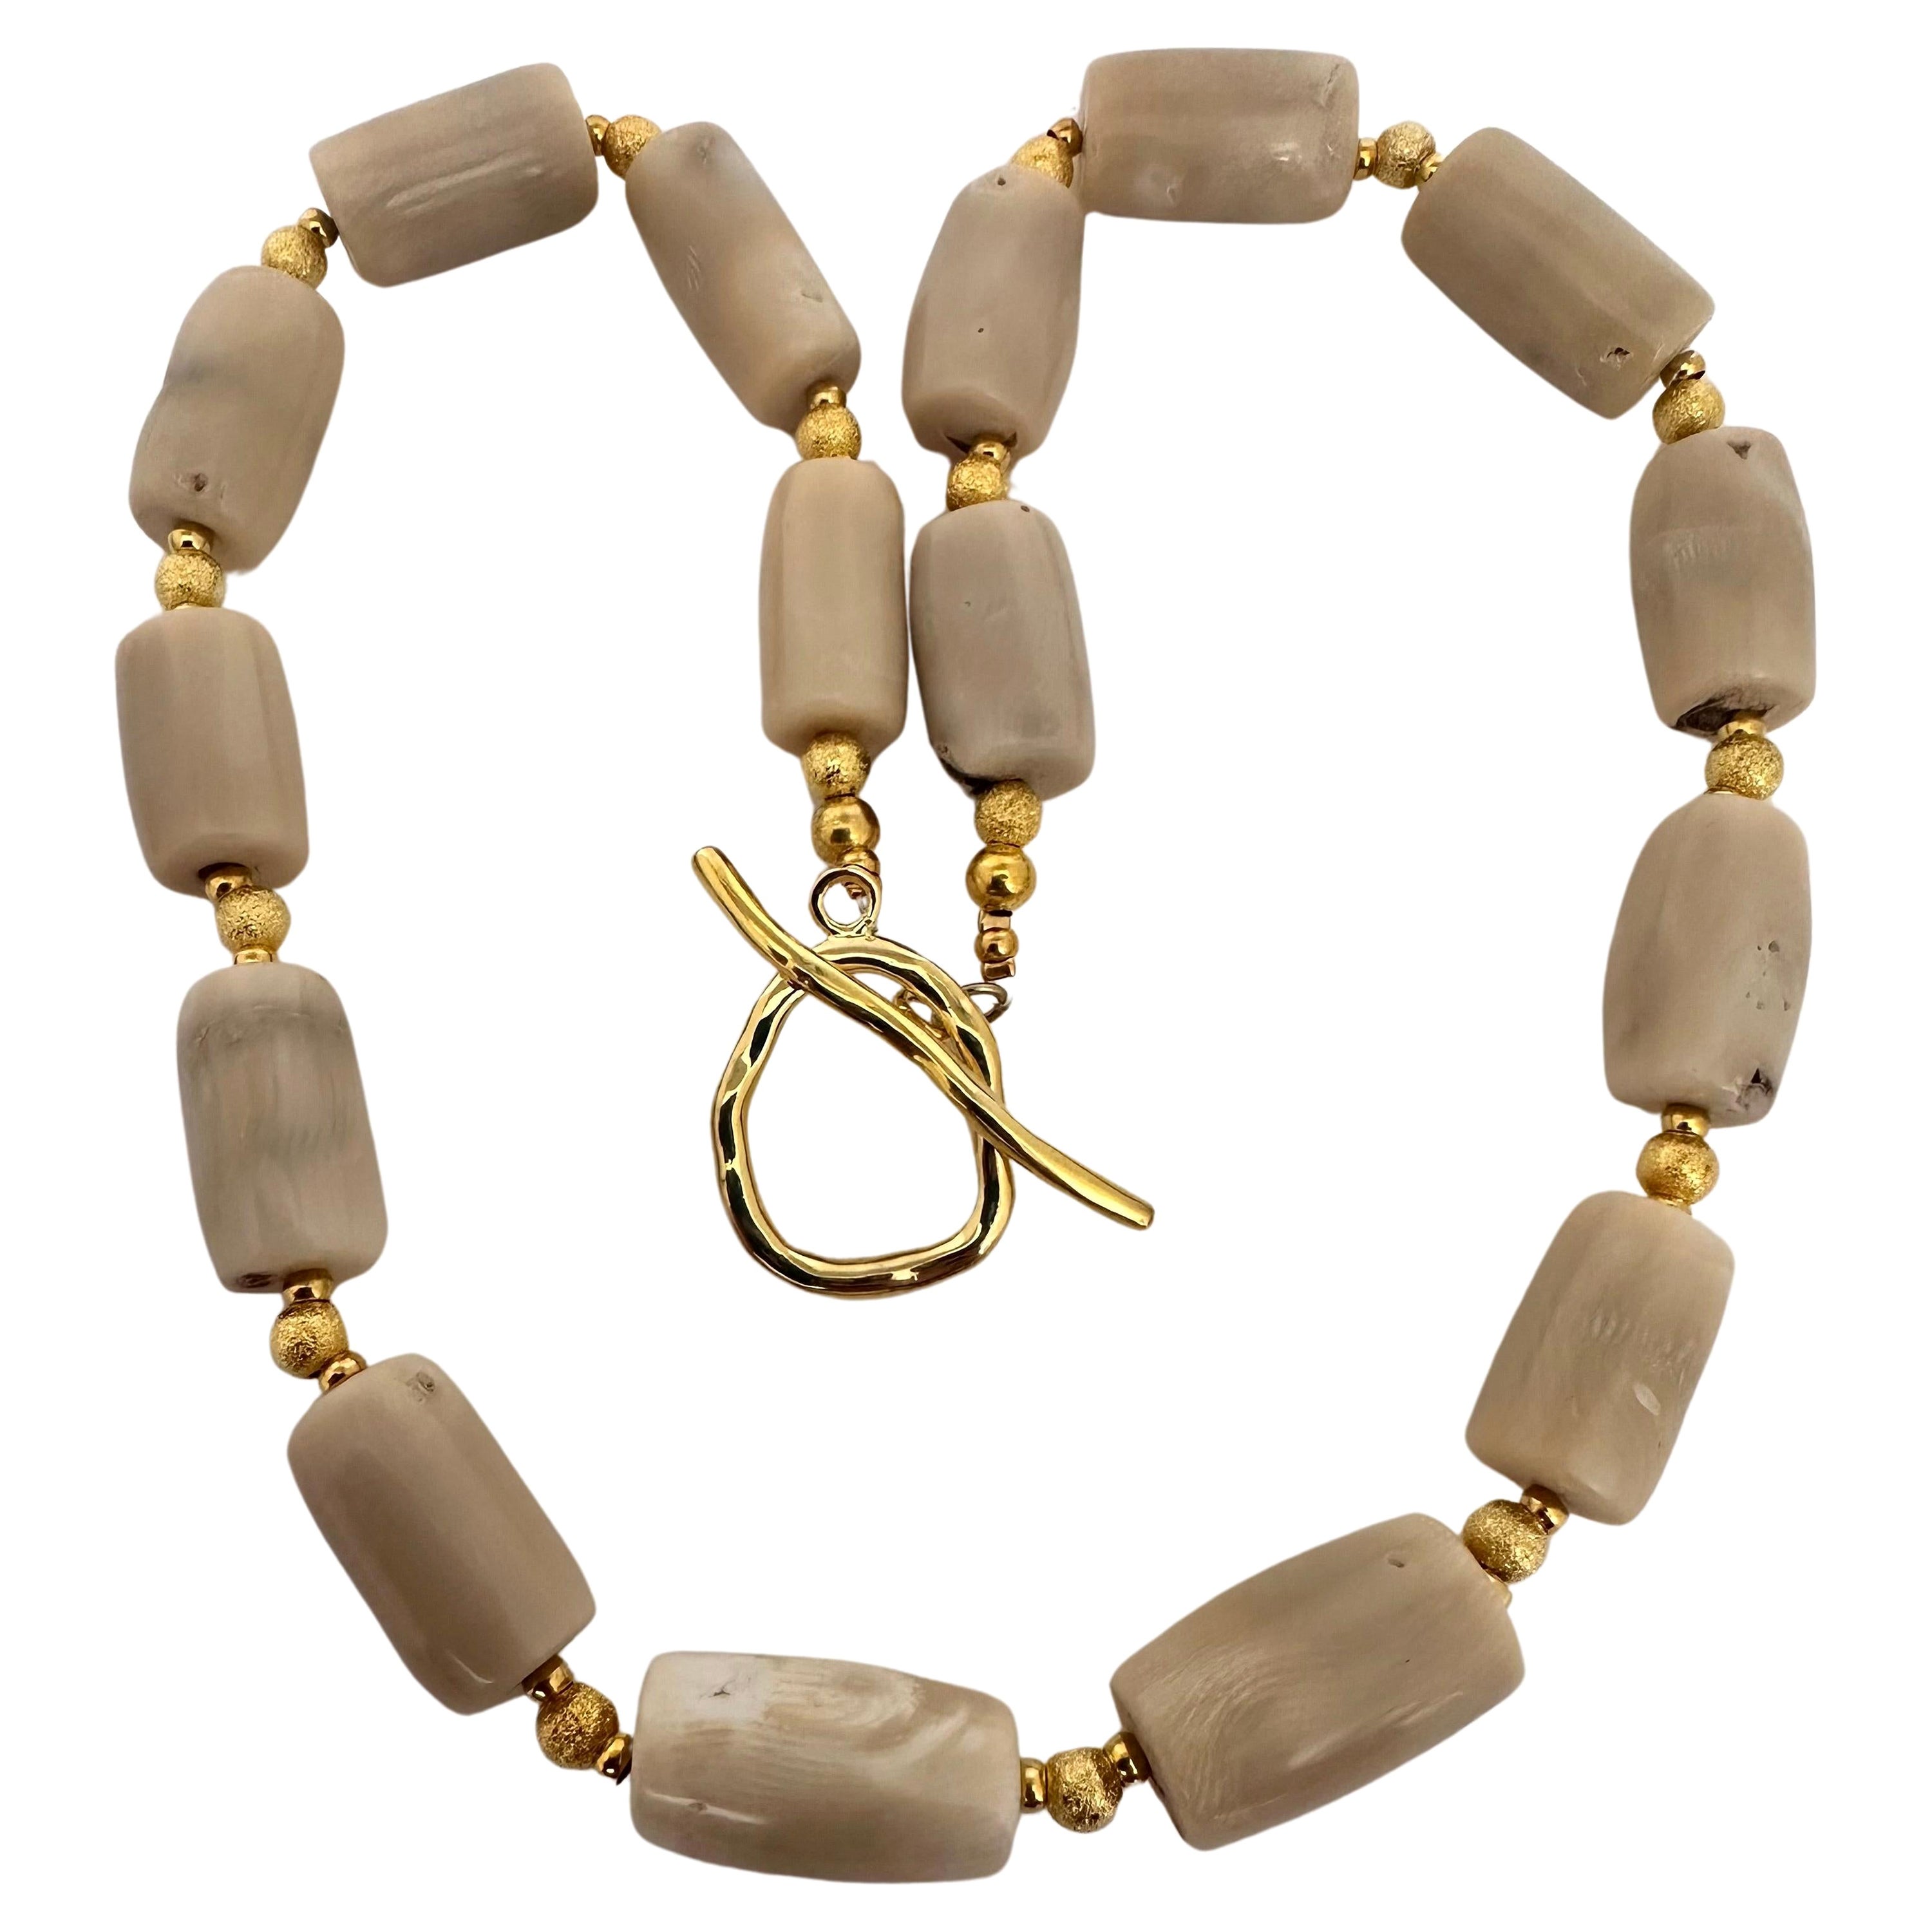 Handmade Gold Beads and White/Beige Coral Barrel Shaped Beaded 26" Necklace C43